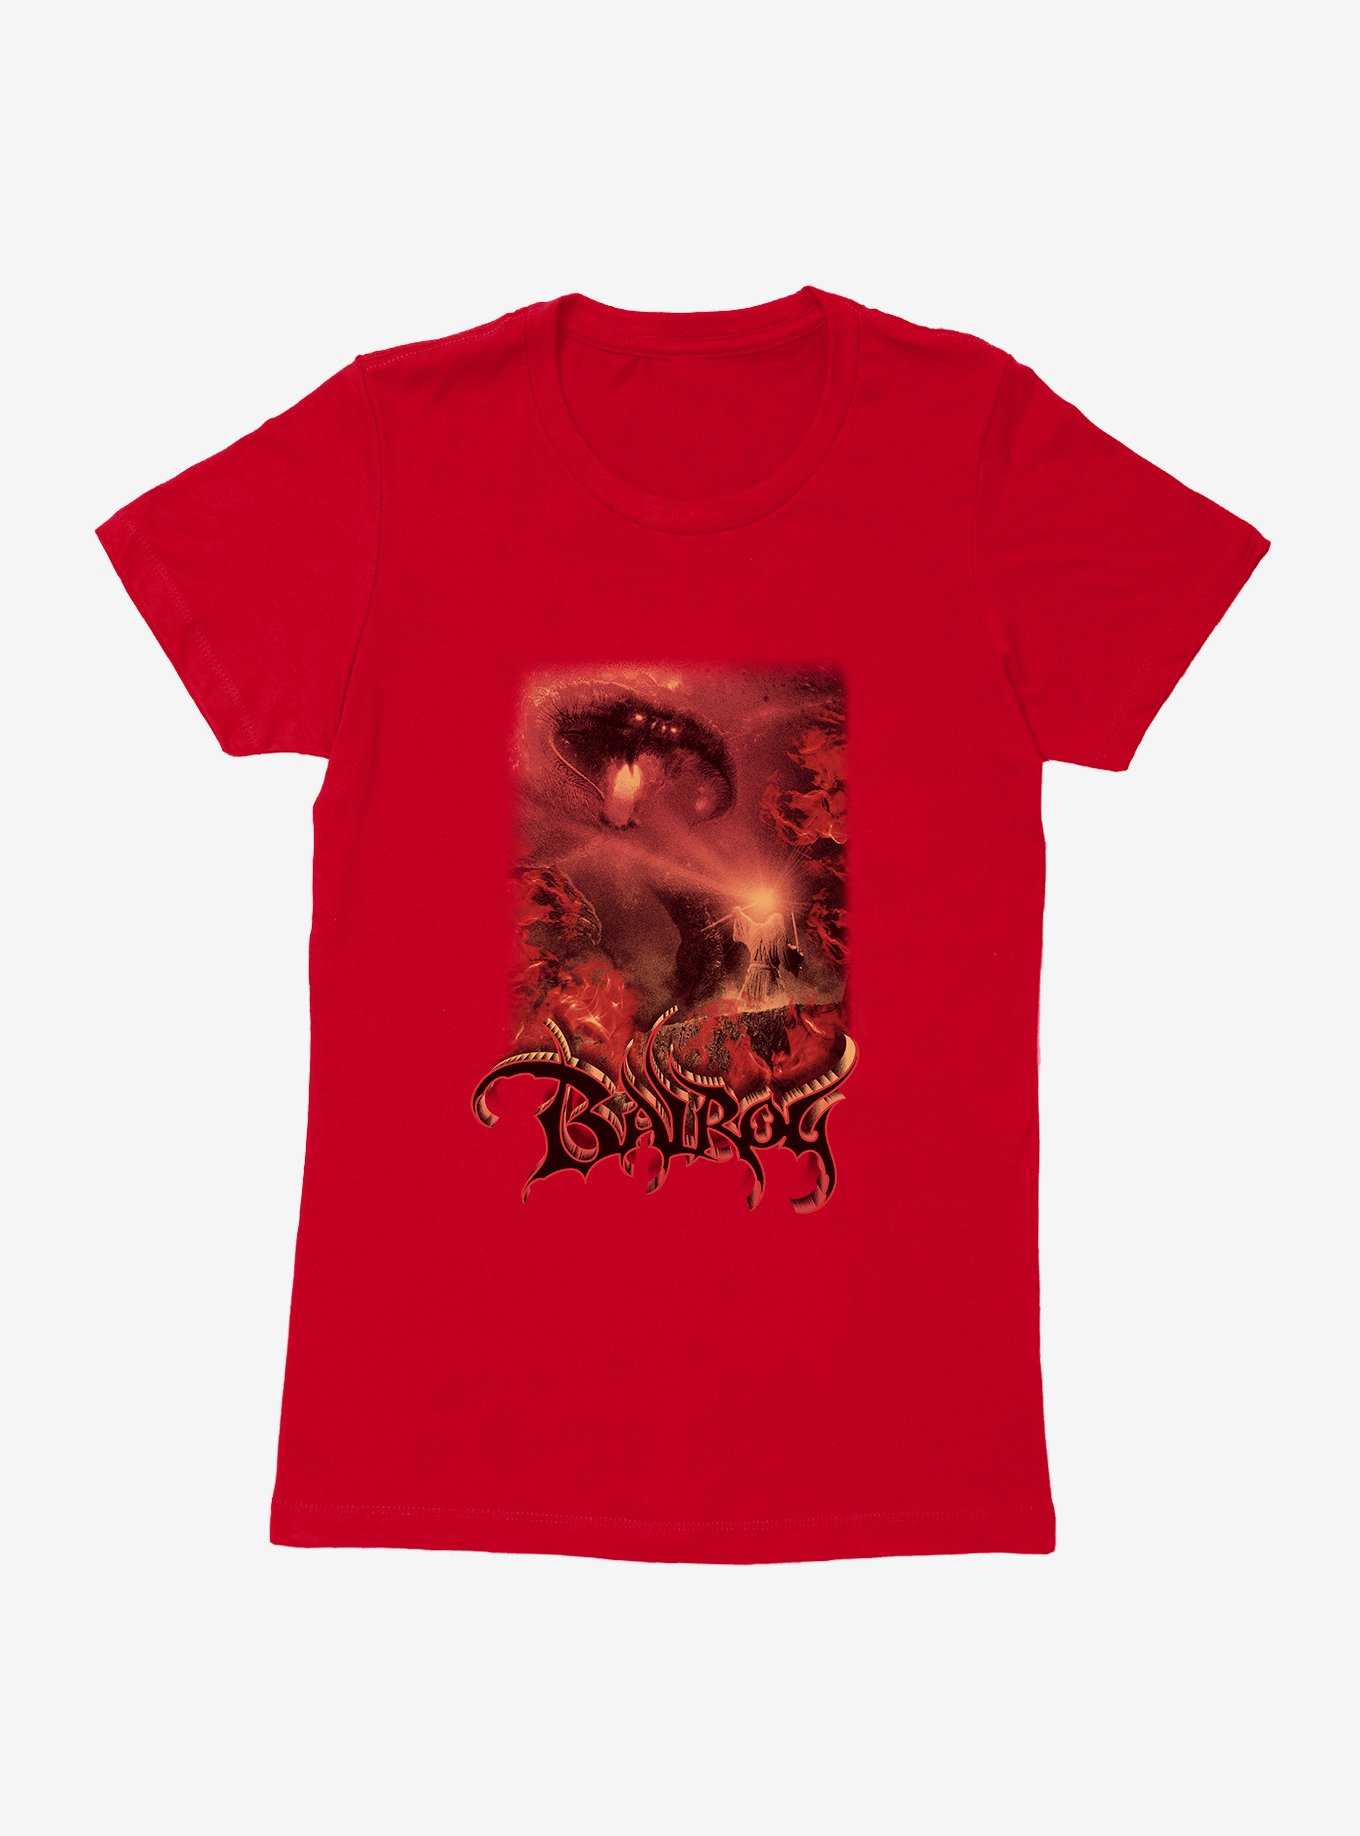 Lord Of The Rings Balrog Womens T-Shirt, , hi-res